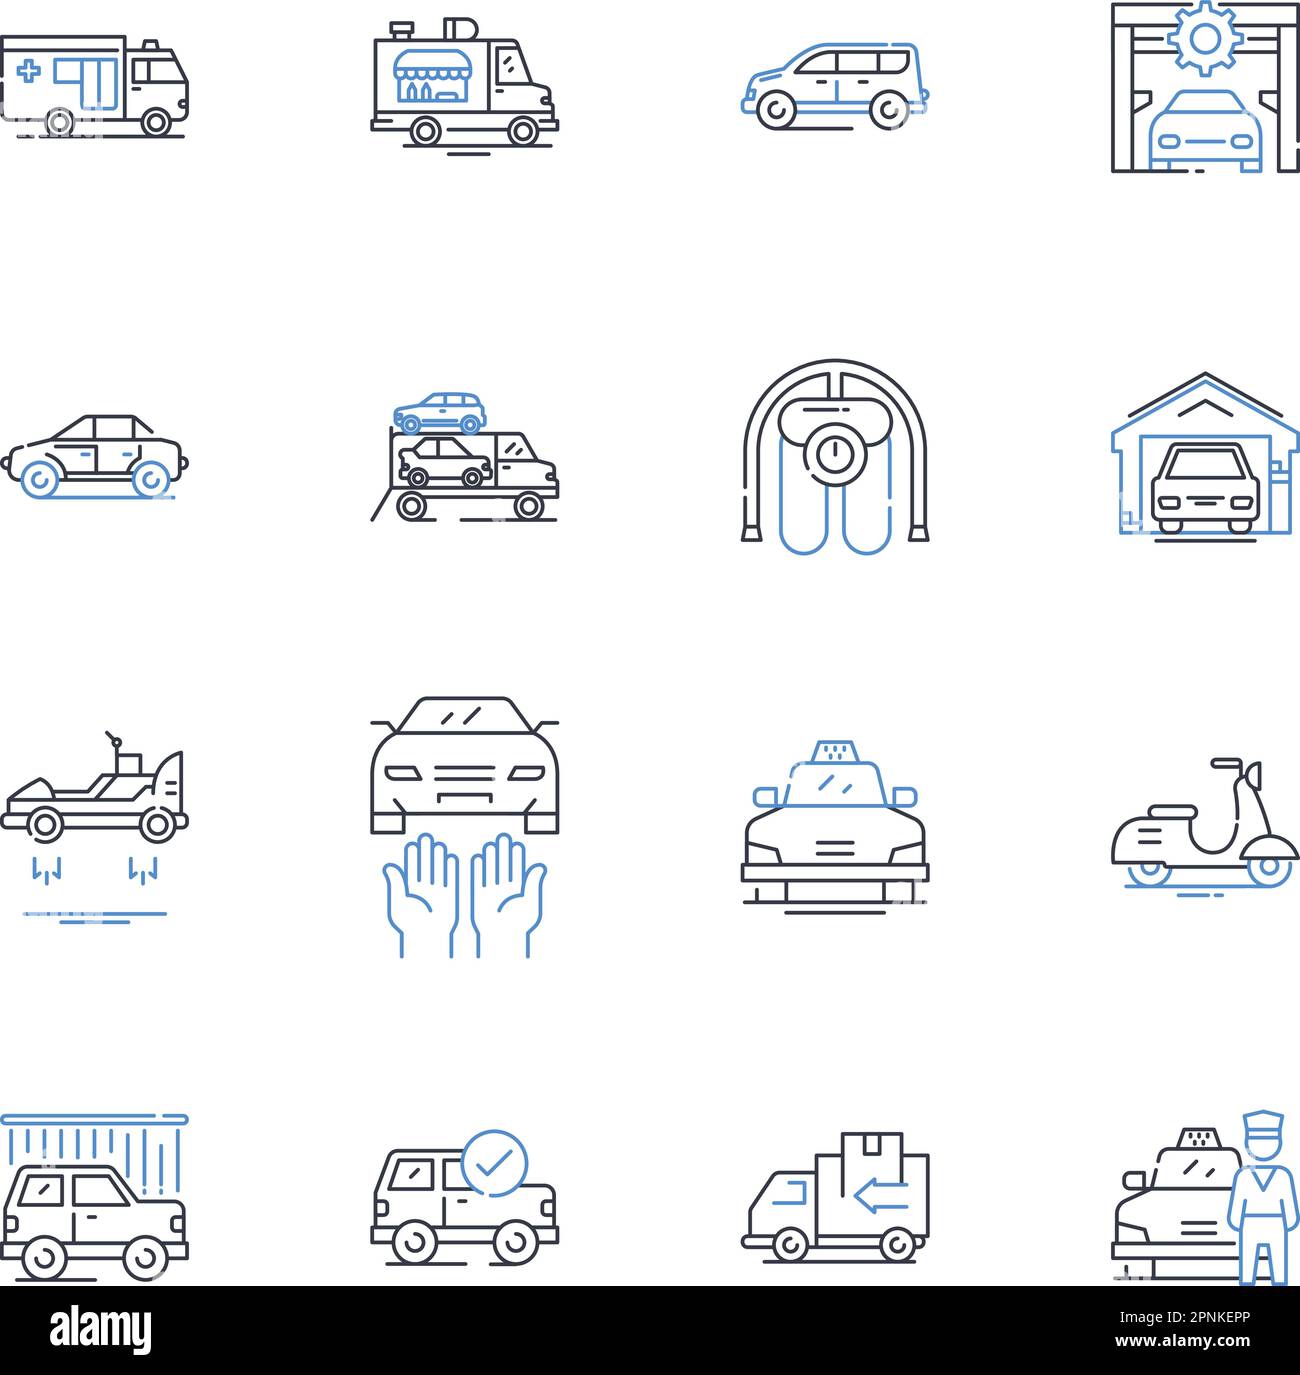 Taxi line icons collection. Cab, Driver, Fare, Meter, Taxi stand, Ride, Transportation vector and linear illustration. Passenger,Hail,Taxi app outline Stock Vector